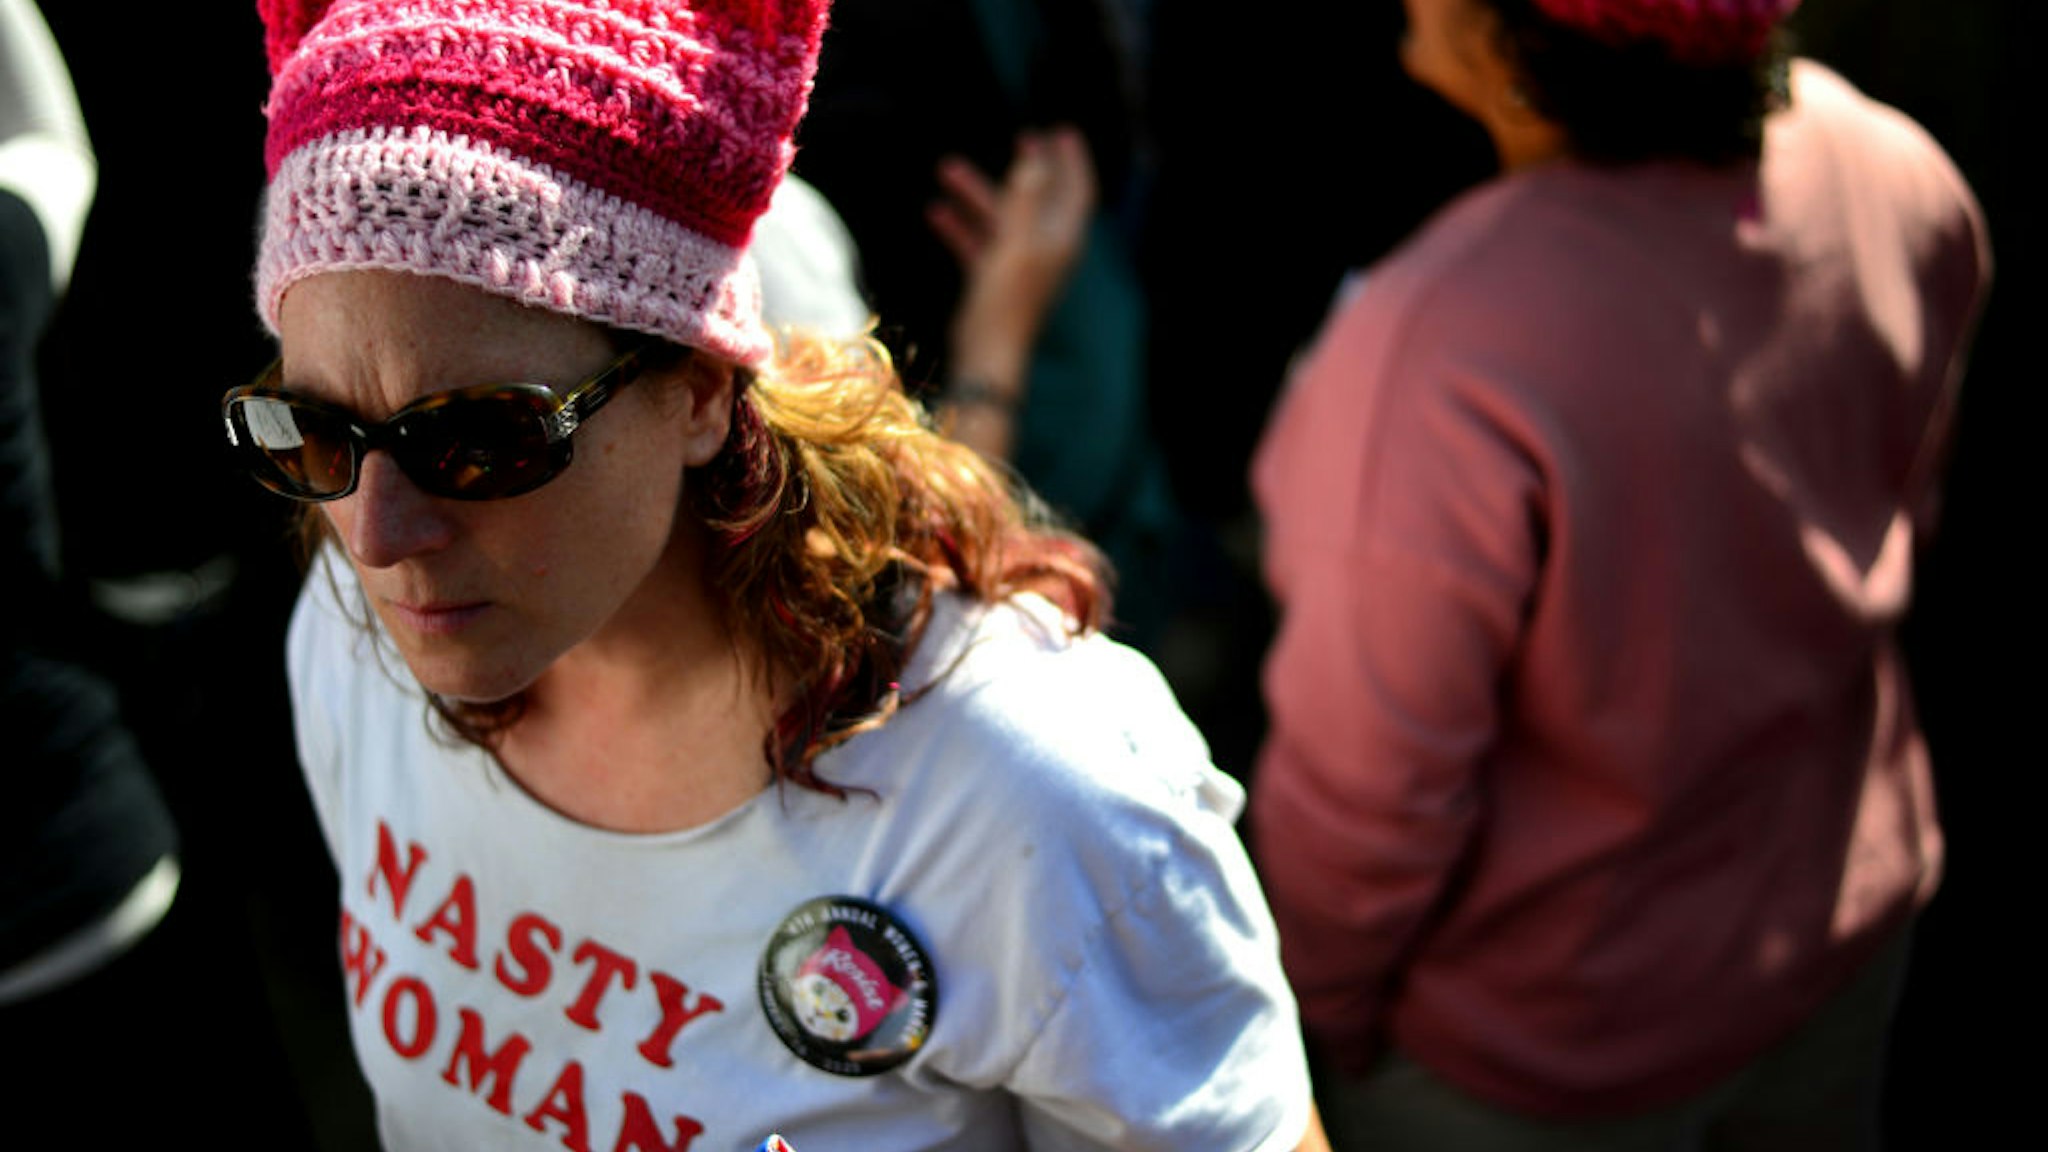 An activist participates in the 4th annual Women's March LA: Women Rising at Pershing Square on January 18, 2020 in Los Angeles, California.